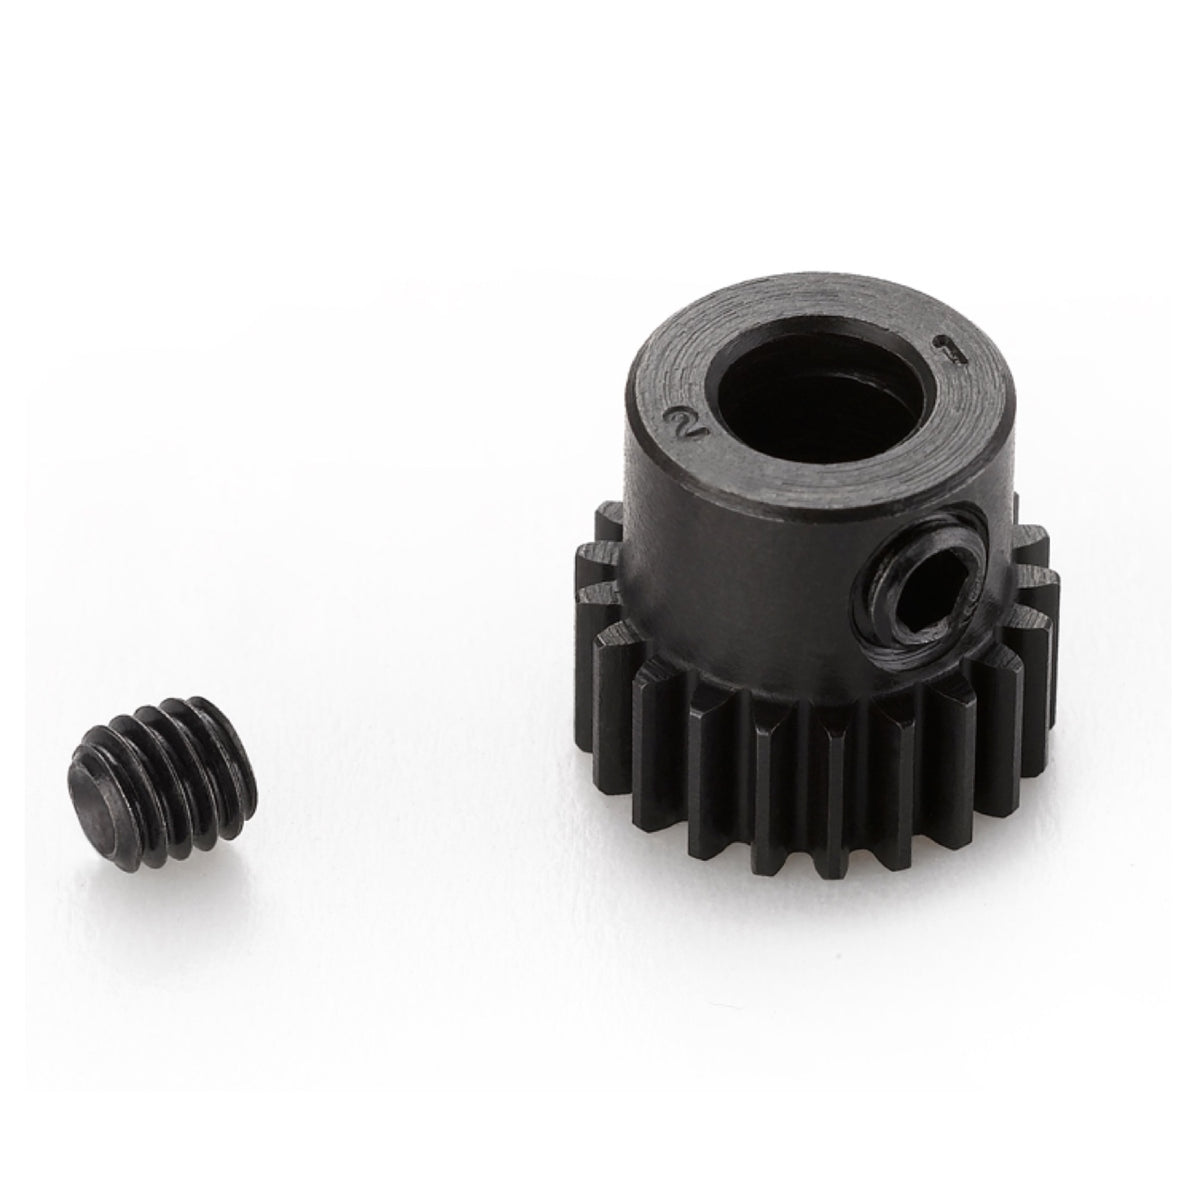 Pinion Gears for Motor